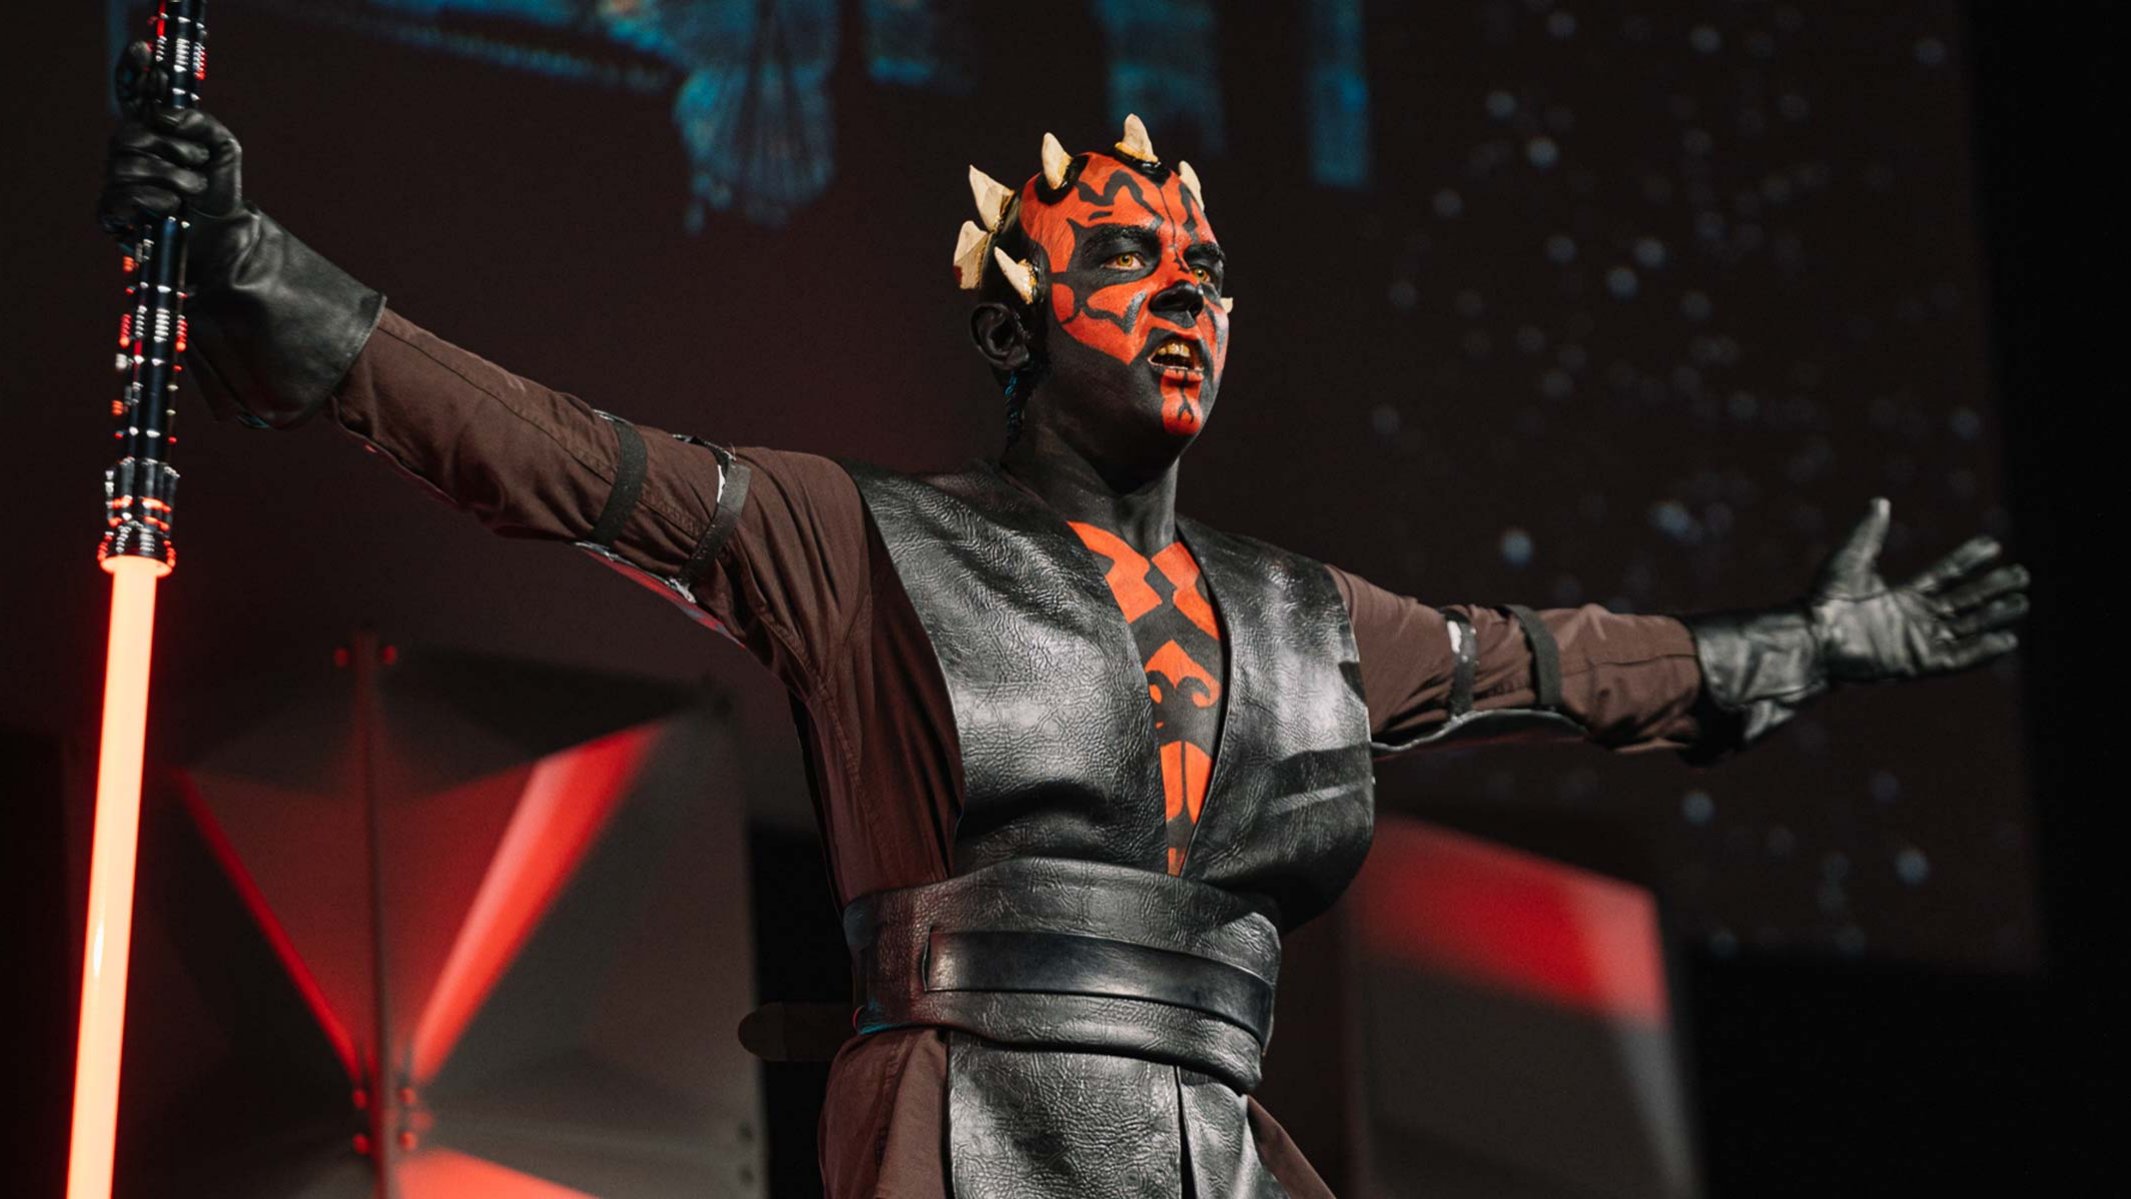 The Cosplay Showcase is where fans and cosplayers from across the galaxy can showcase their craftsmanship in style.   The Cosplay Showcase will take place on Saturday, April 19, 2025. Applications open January 2025.